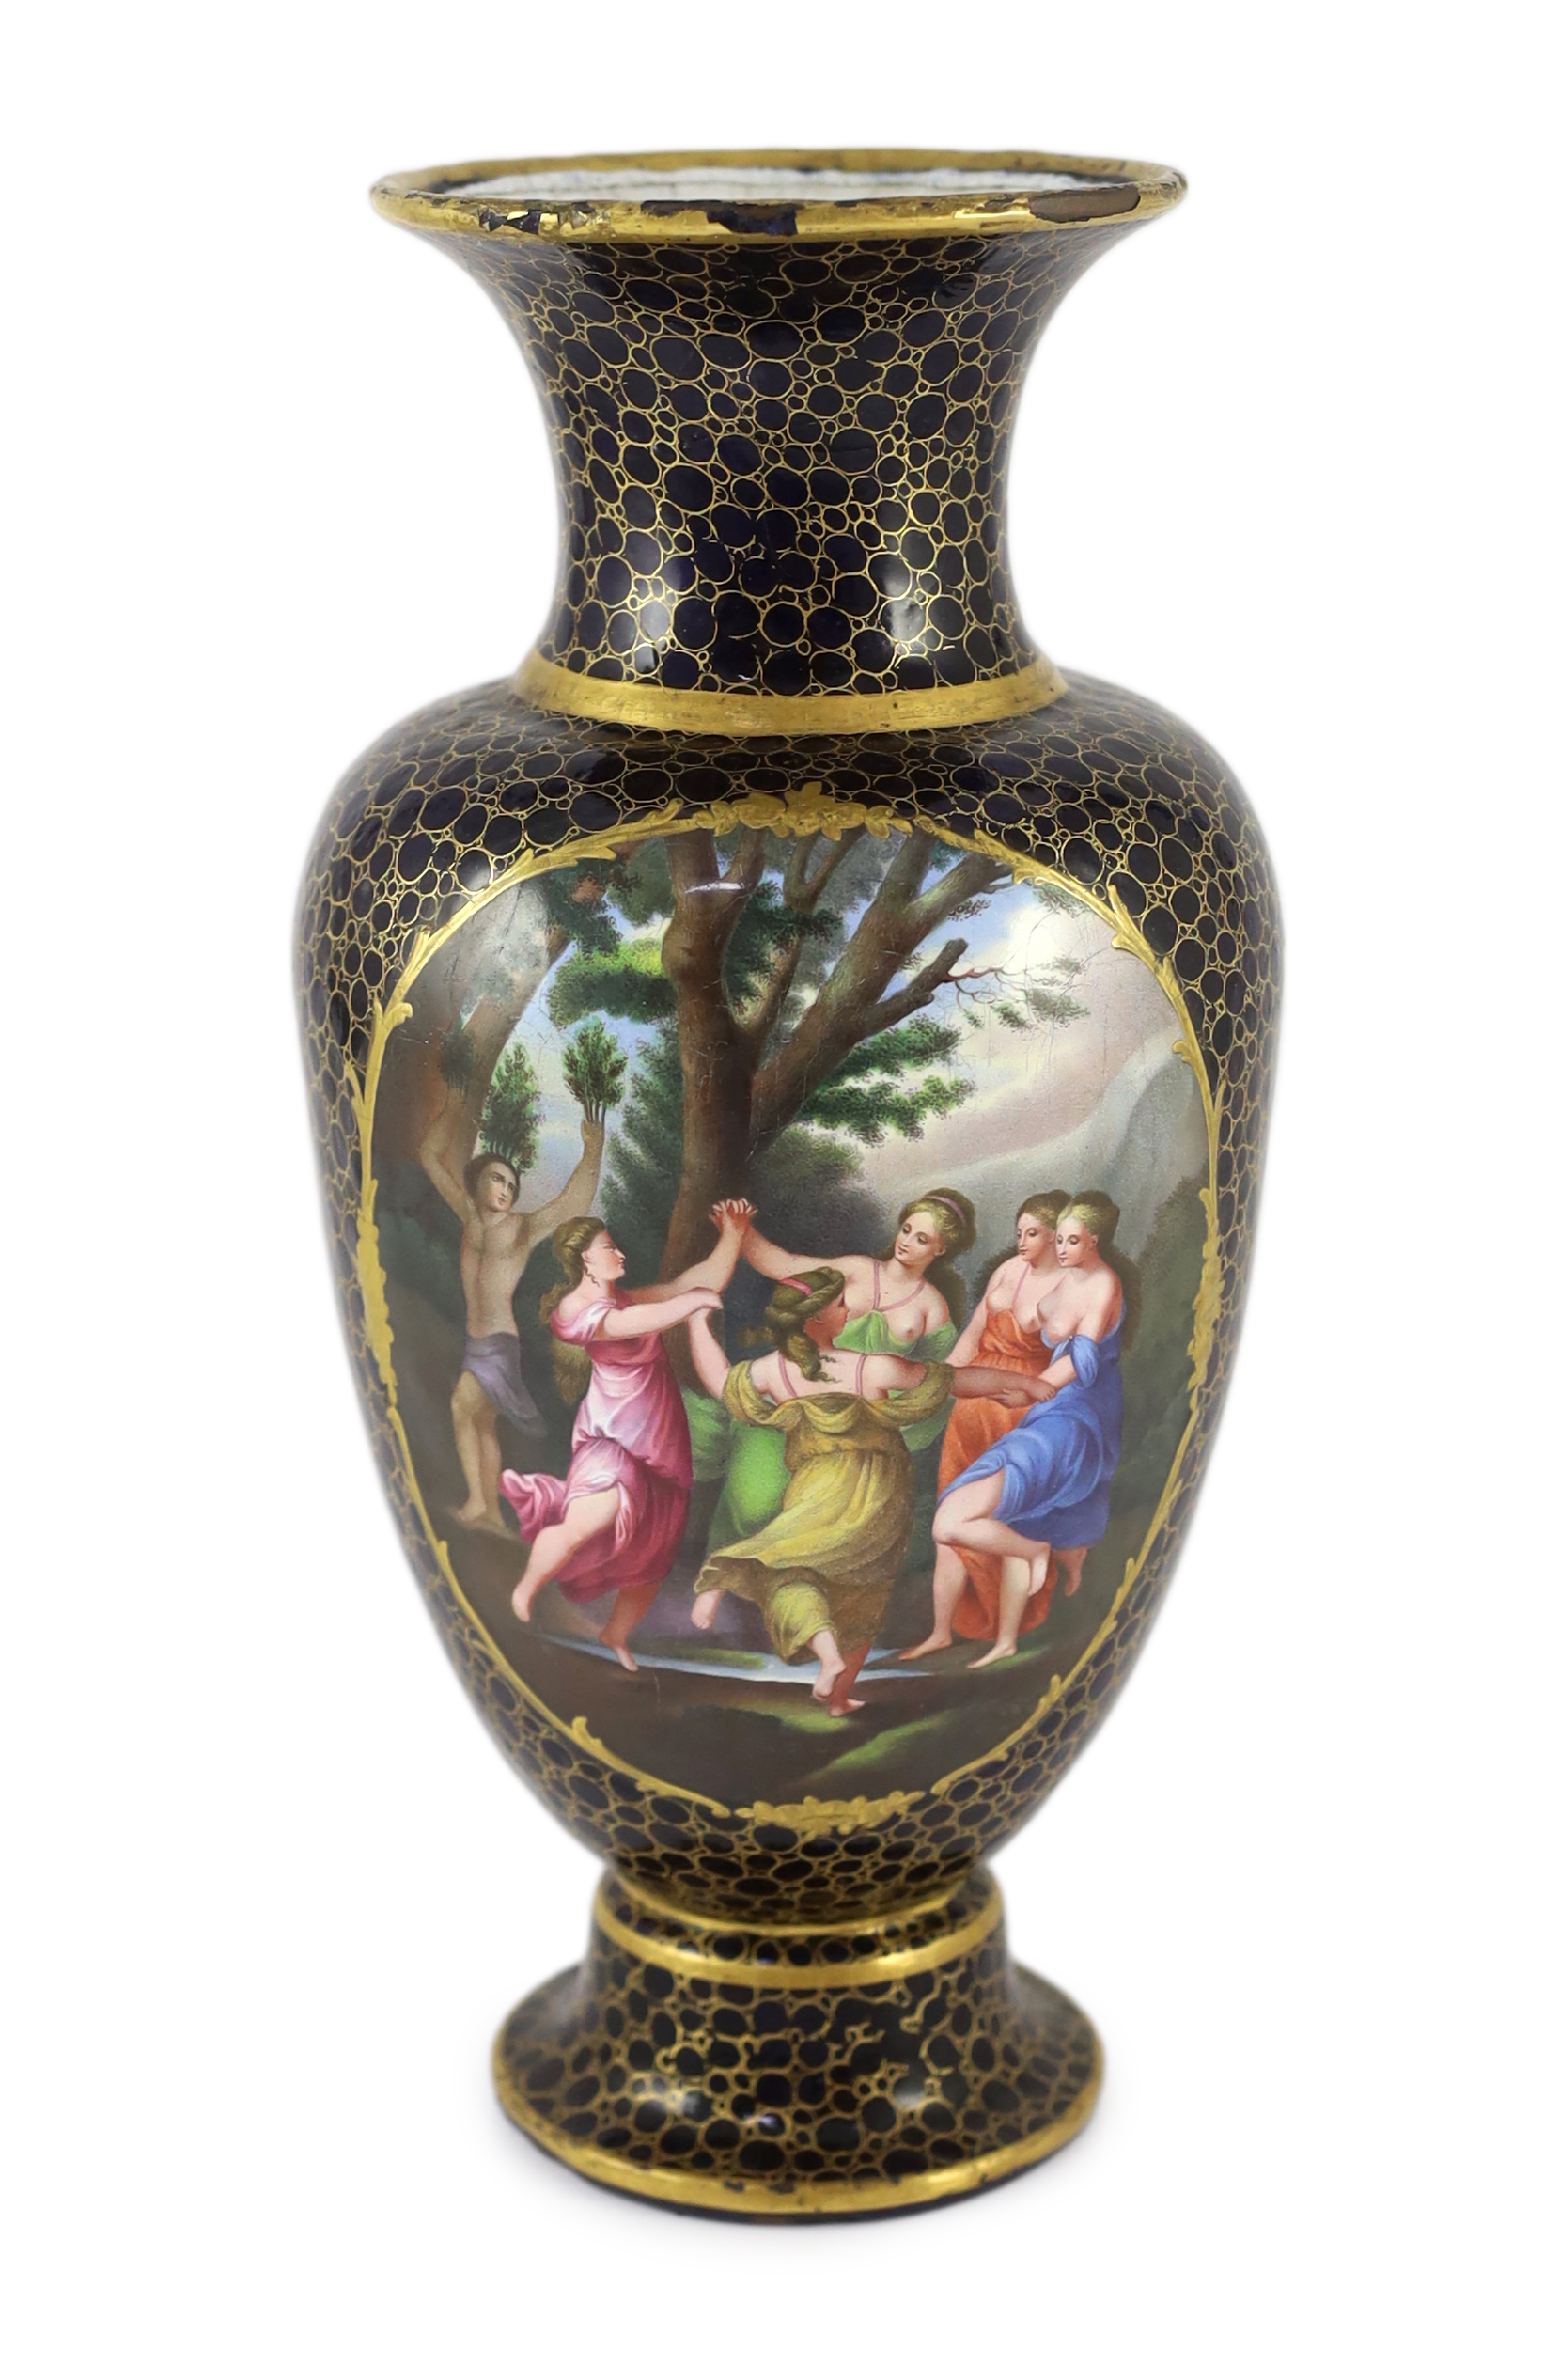 A rare neo-classical enamel on copper vase, probably Vienna 18th/19th century                                                                                                                                               